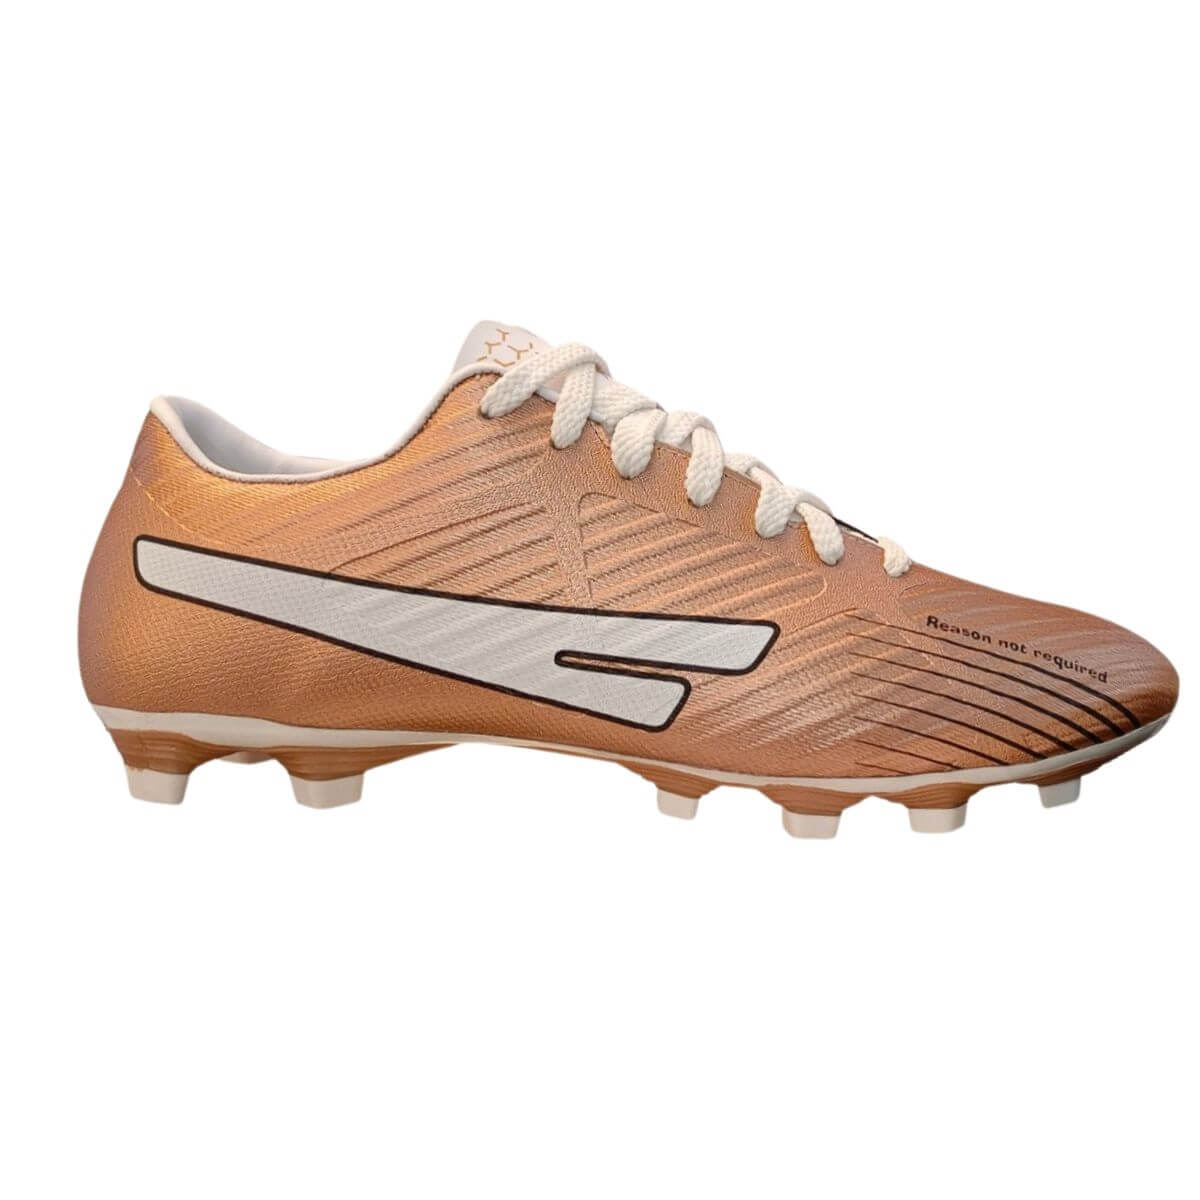 Soccer Cleats and Apparel for Men and Women - New Balance